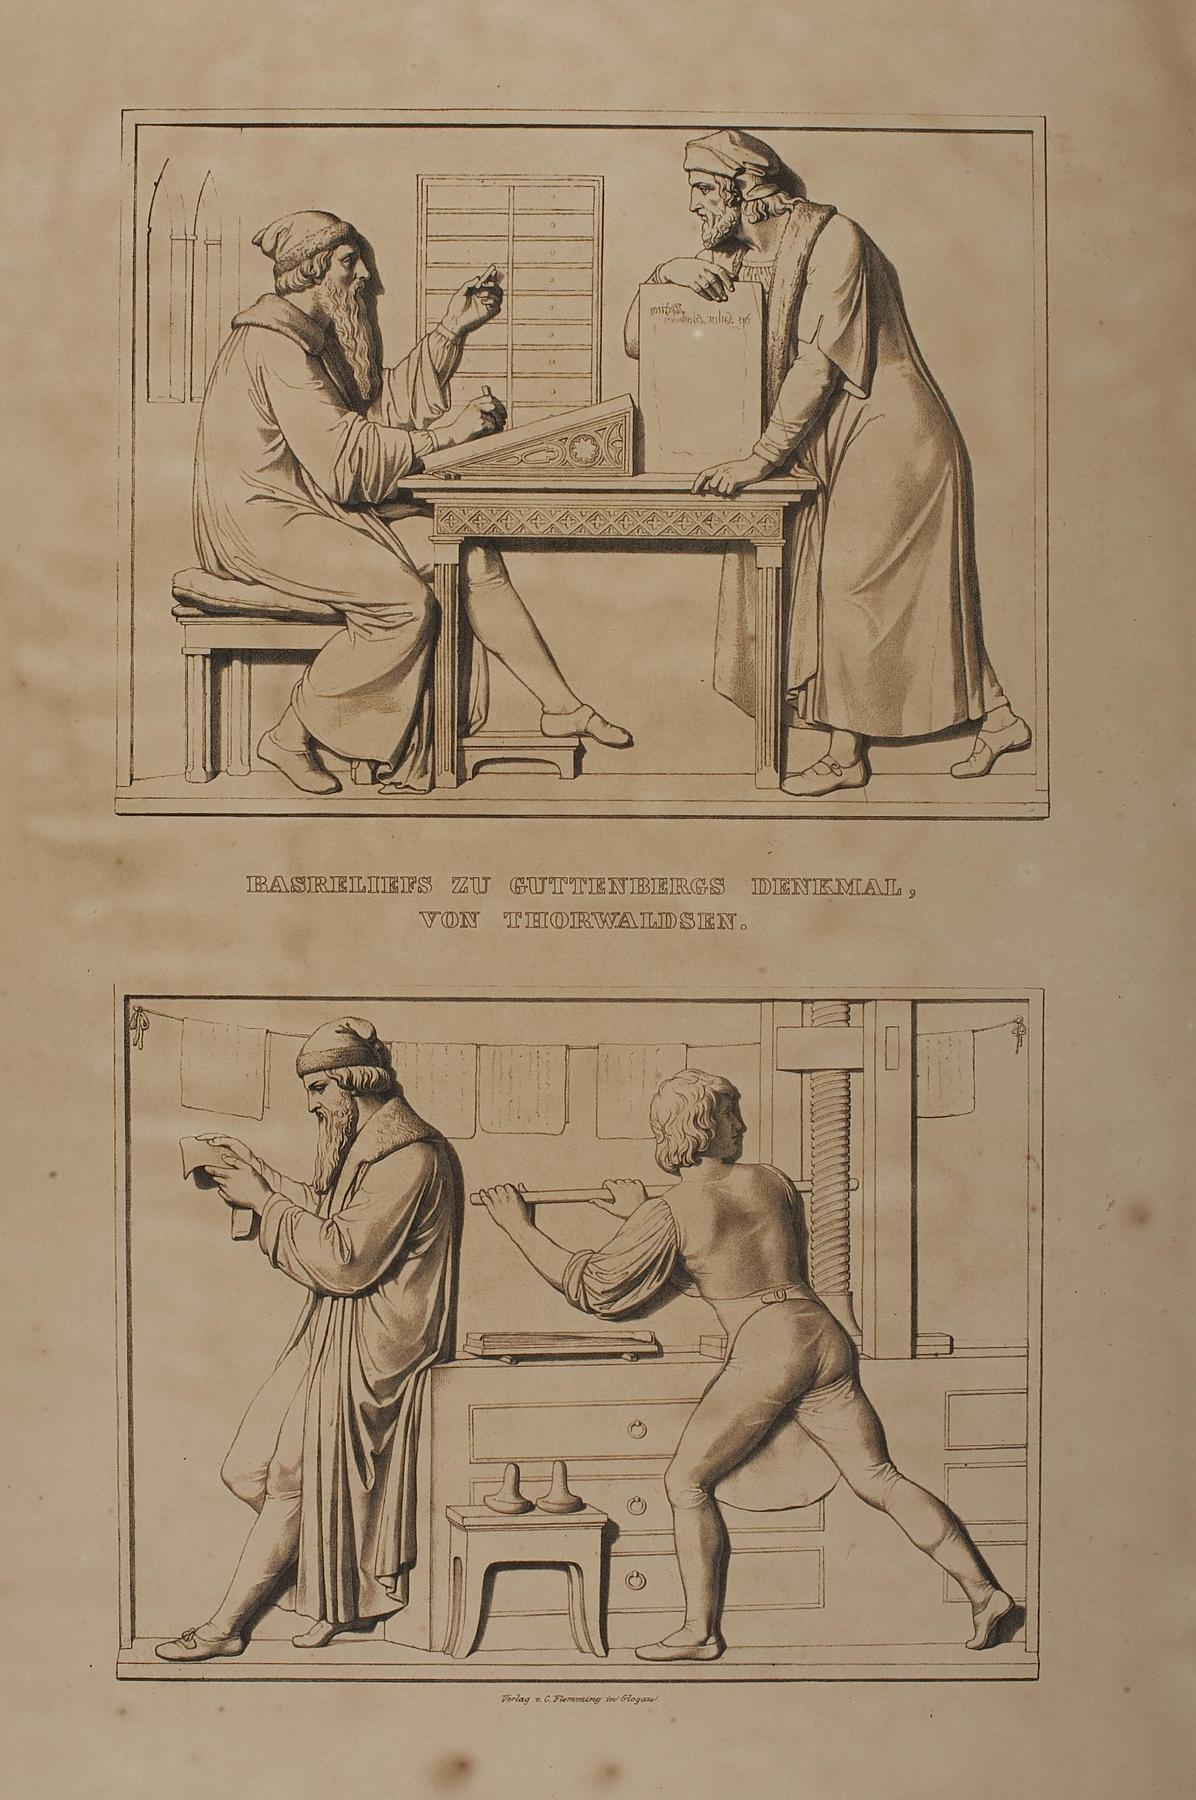 The Invention of the Movable Types. The Invention of the Printing Press, E83b